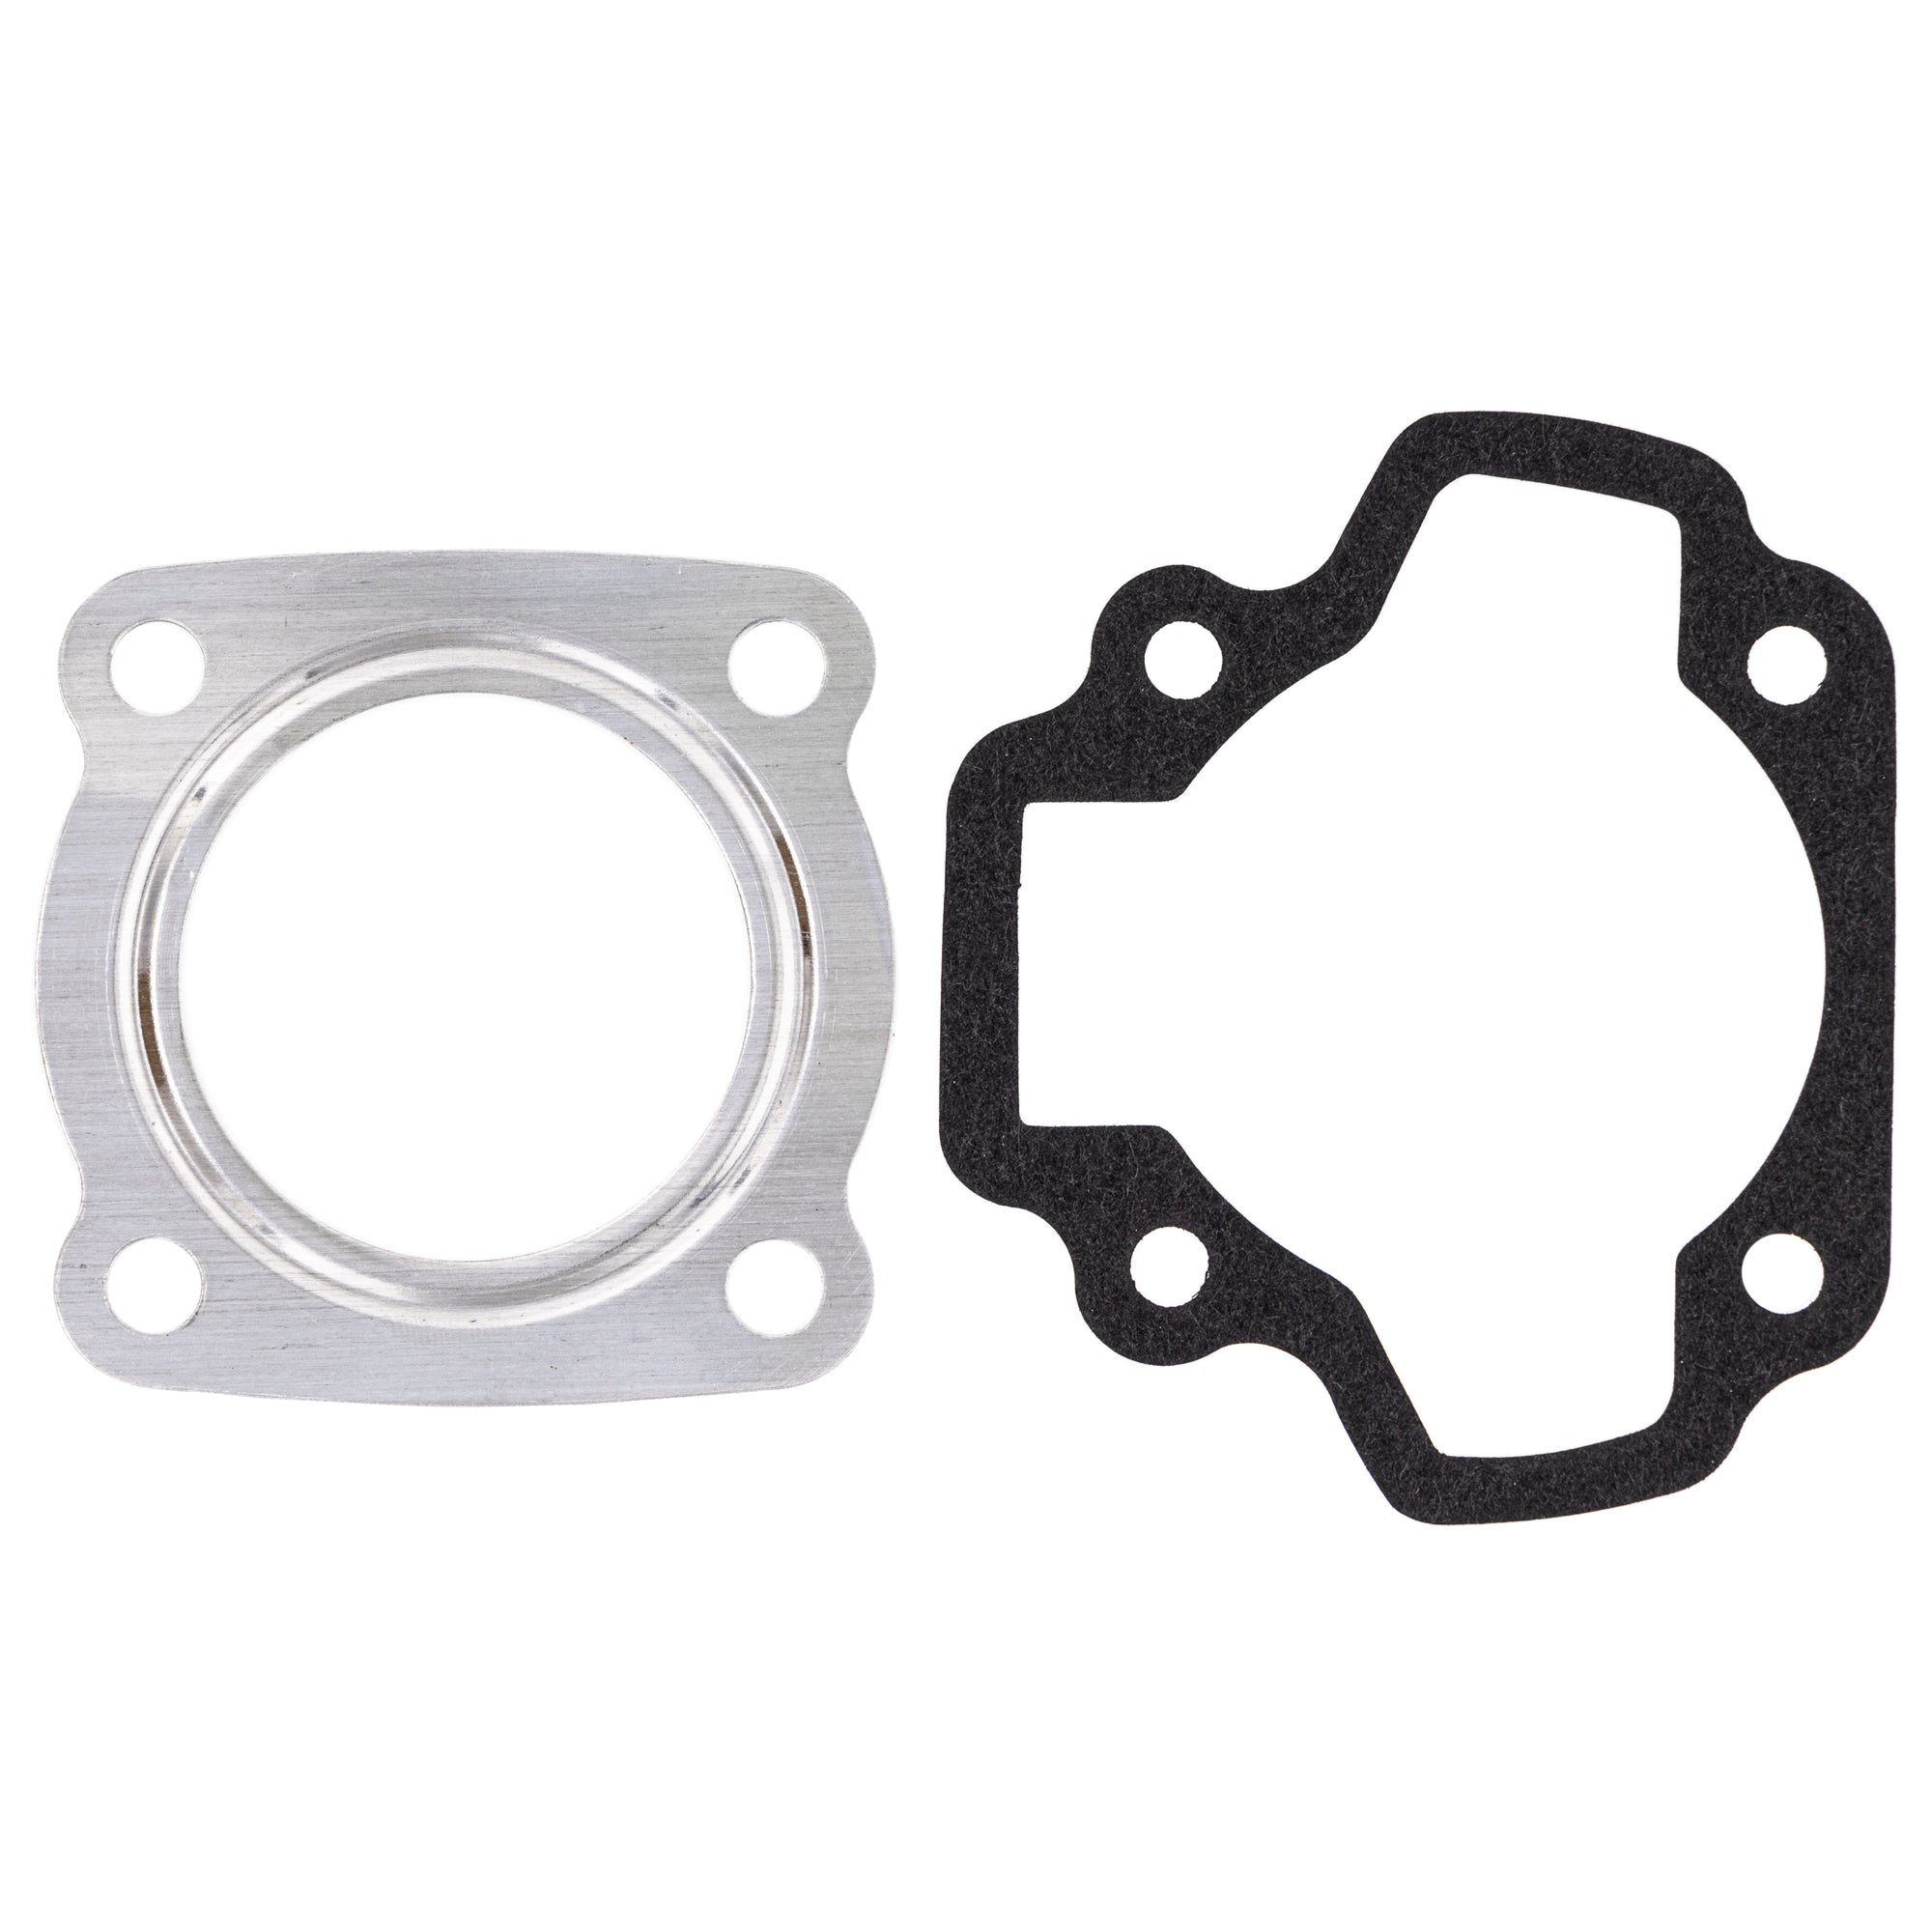 Wiseco Piston Cylinder Gasket Head Top End Kit for Yamaha PW50